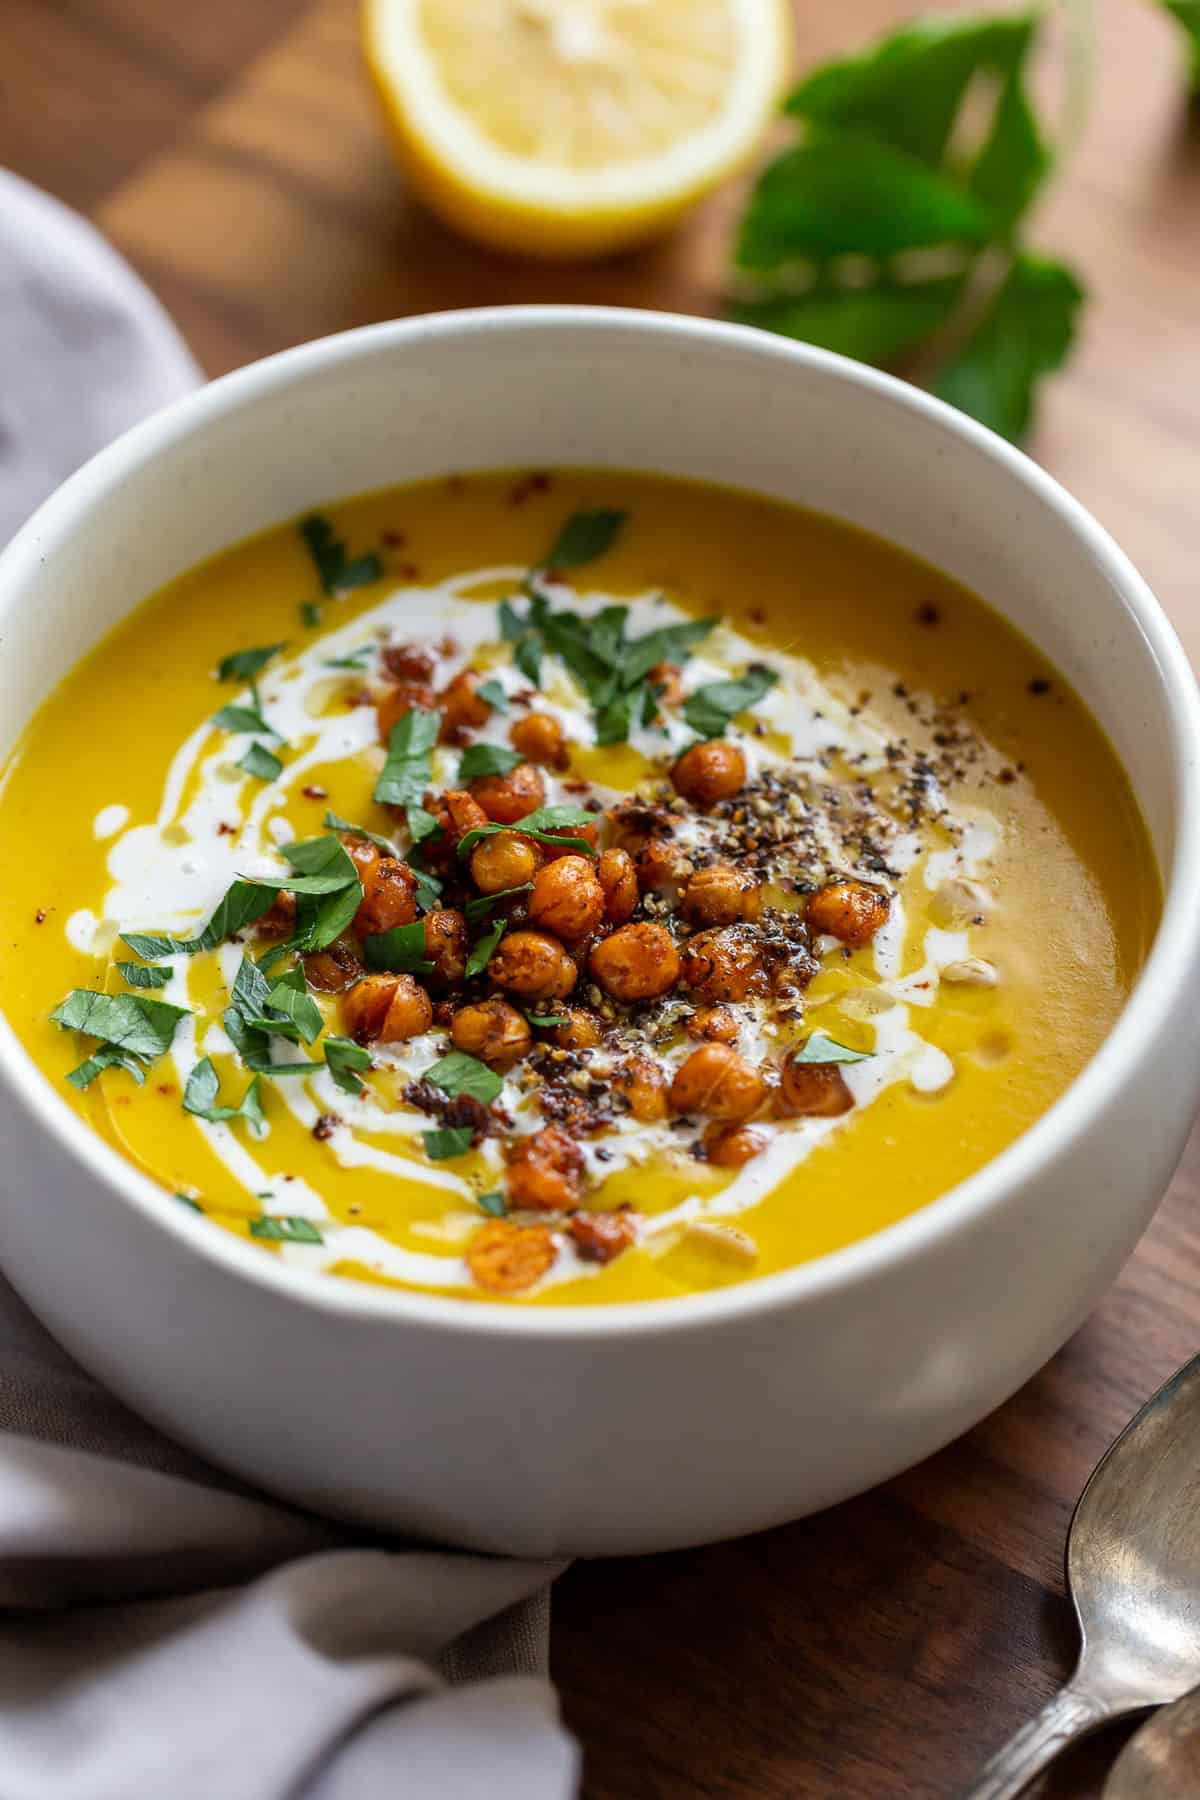 Bowl of chickpea turmeric soup topped with a swirl of coconut cream, crispy spiced chickpeas, and chopped herbs.